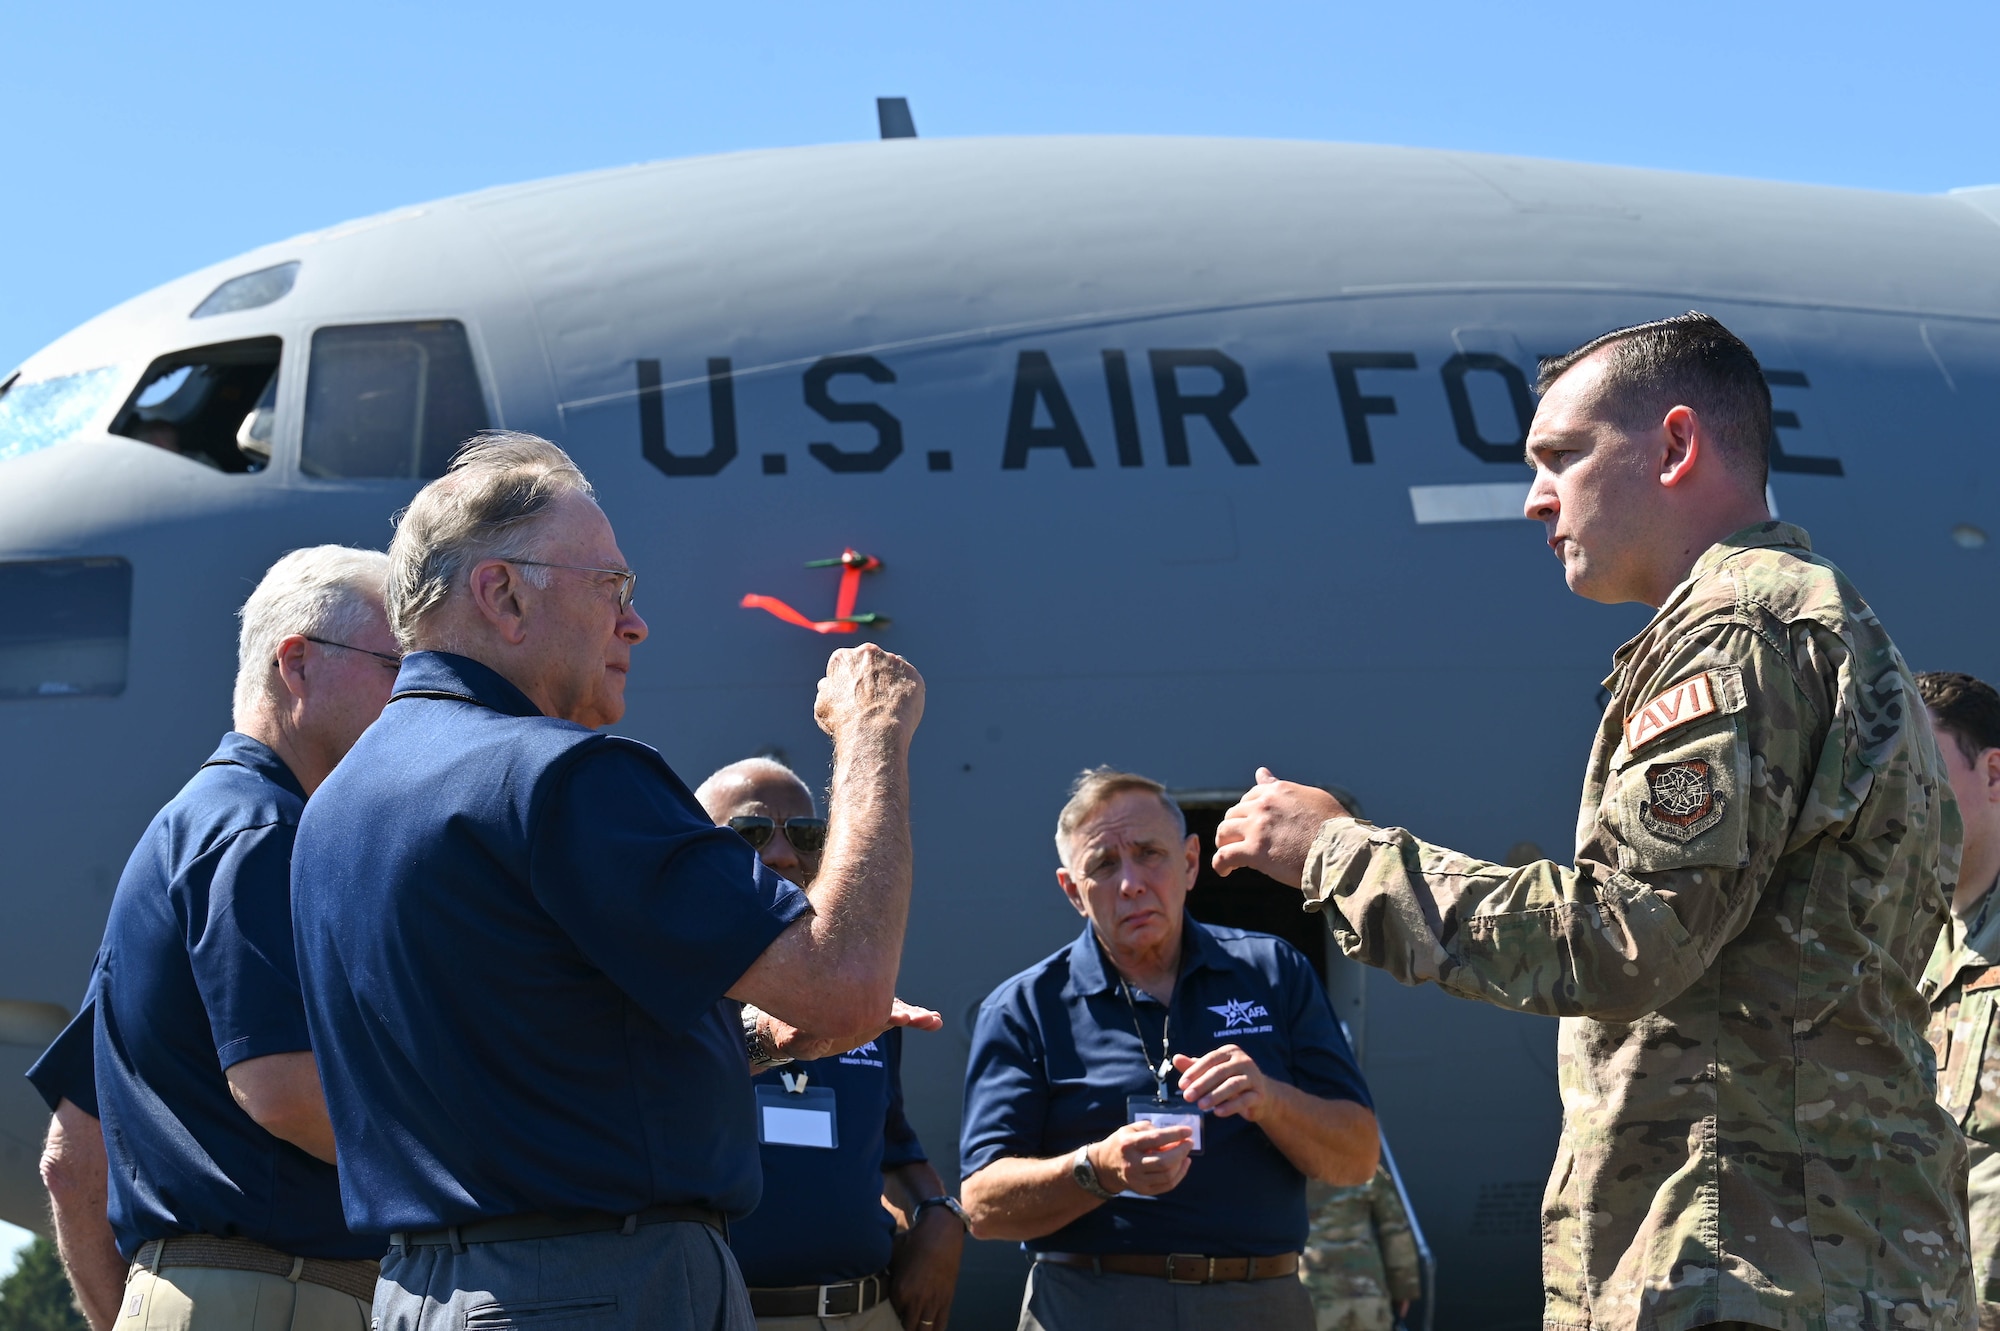 U.S. Air Force retired Senior Leaders Tour the 62d Airlift Wing